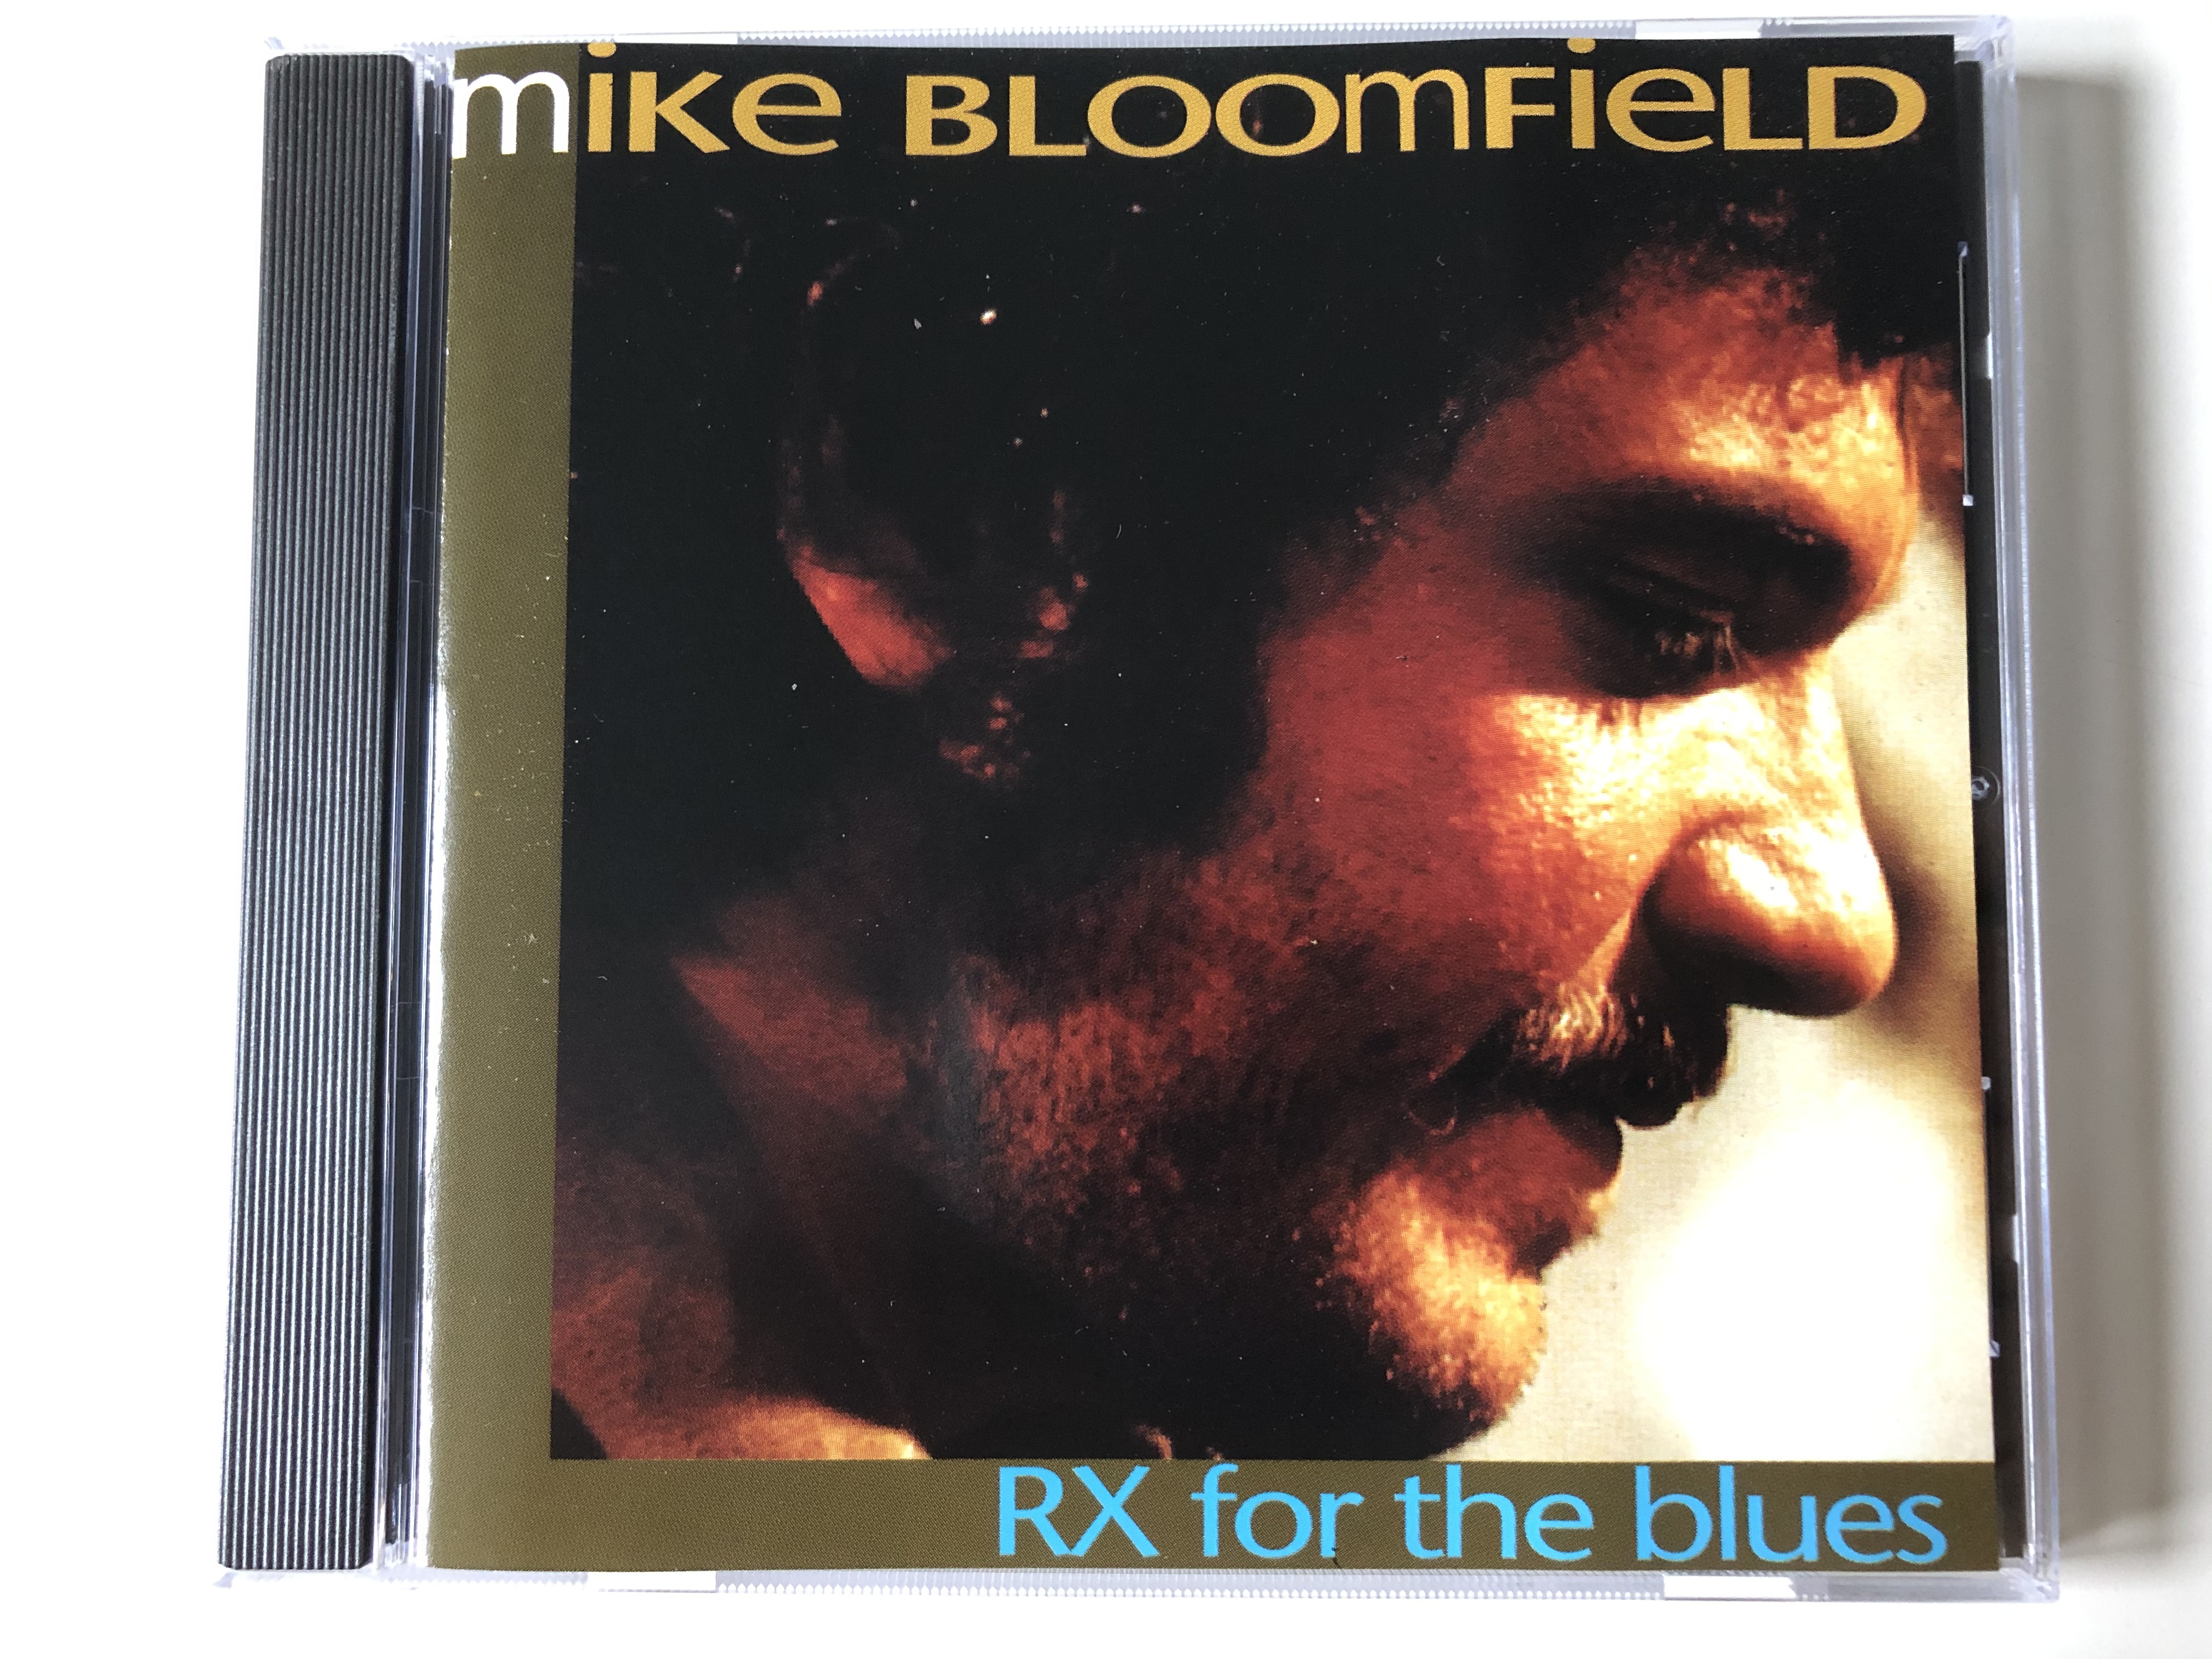 mike-bloomfield-rx-for-the-blues-pilz-audio-cd-1993-stereo-44-8204-2-1-.jpg